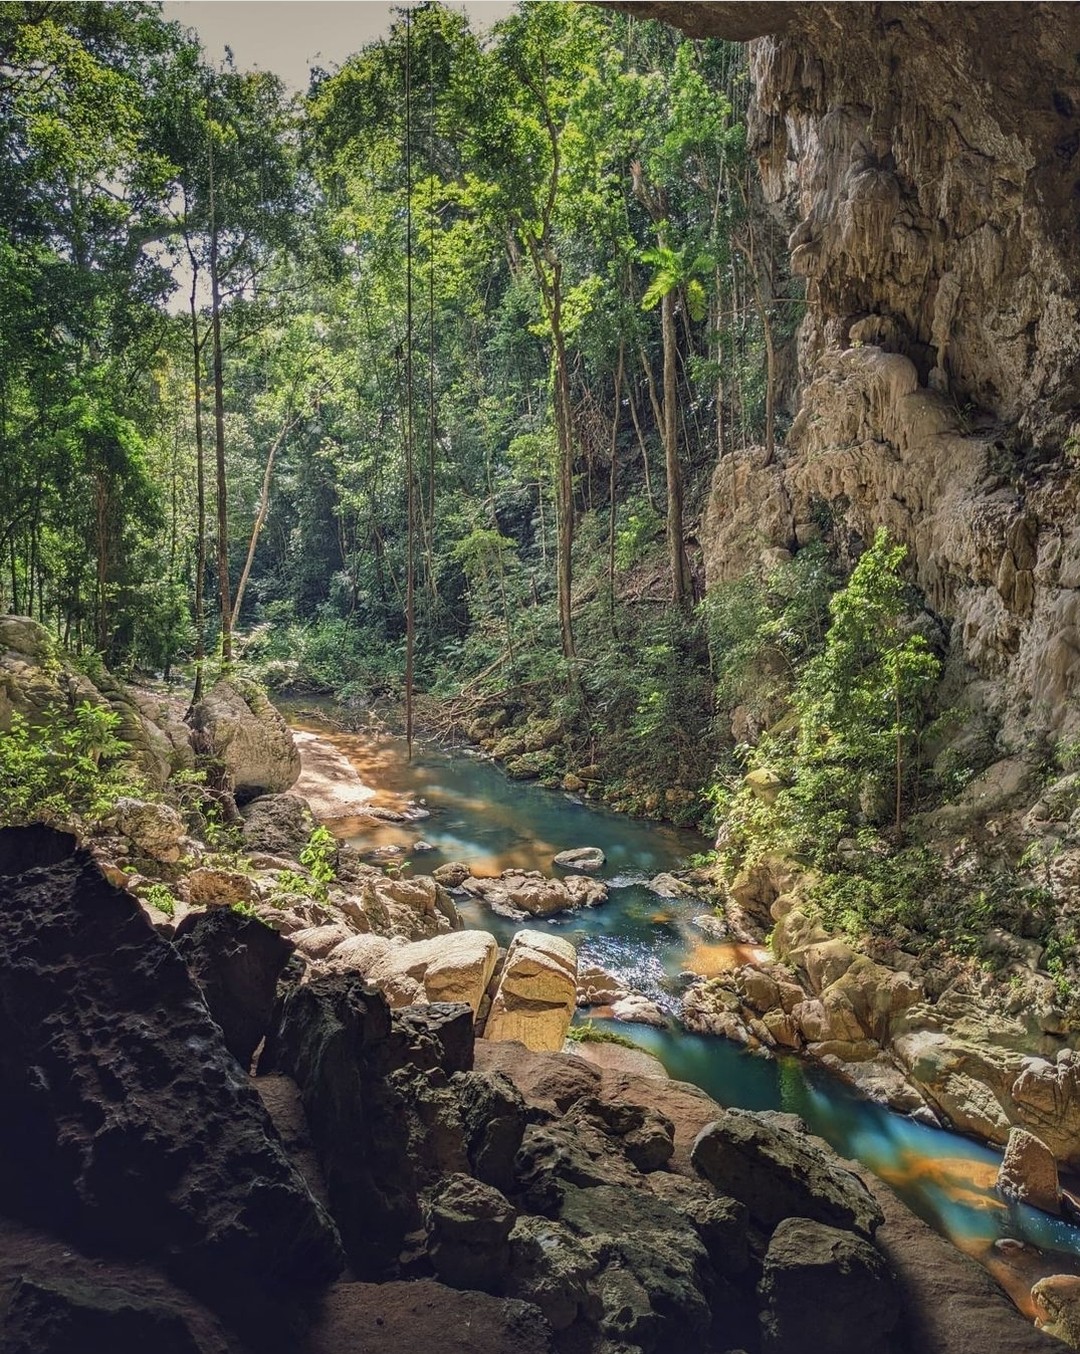 Western Belize is home to an extensive cave network that was once used as spaces for worship, rituals and burials by the Ancient Maya. Be sure to add one of the many caves to your inland itinerary. #travelbelize

????: @wanderesswithastory